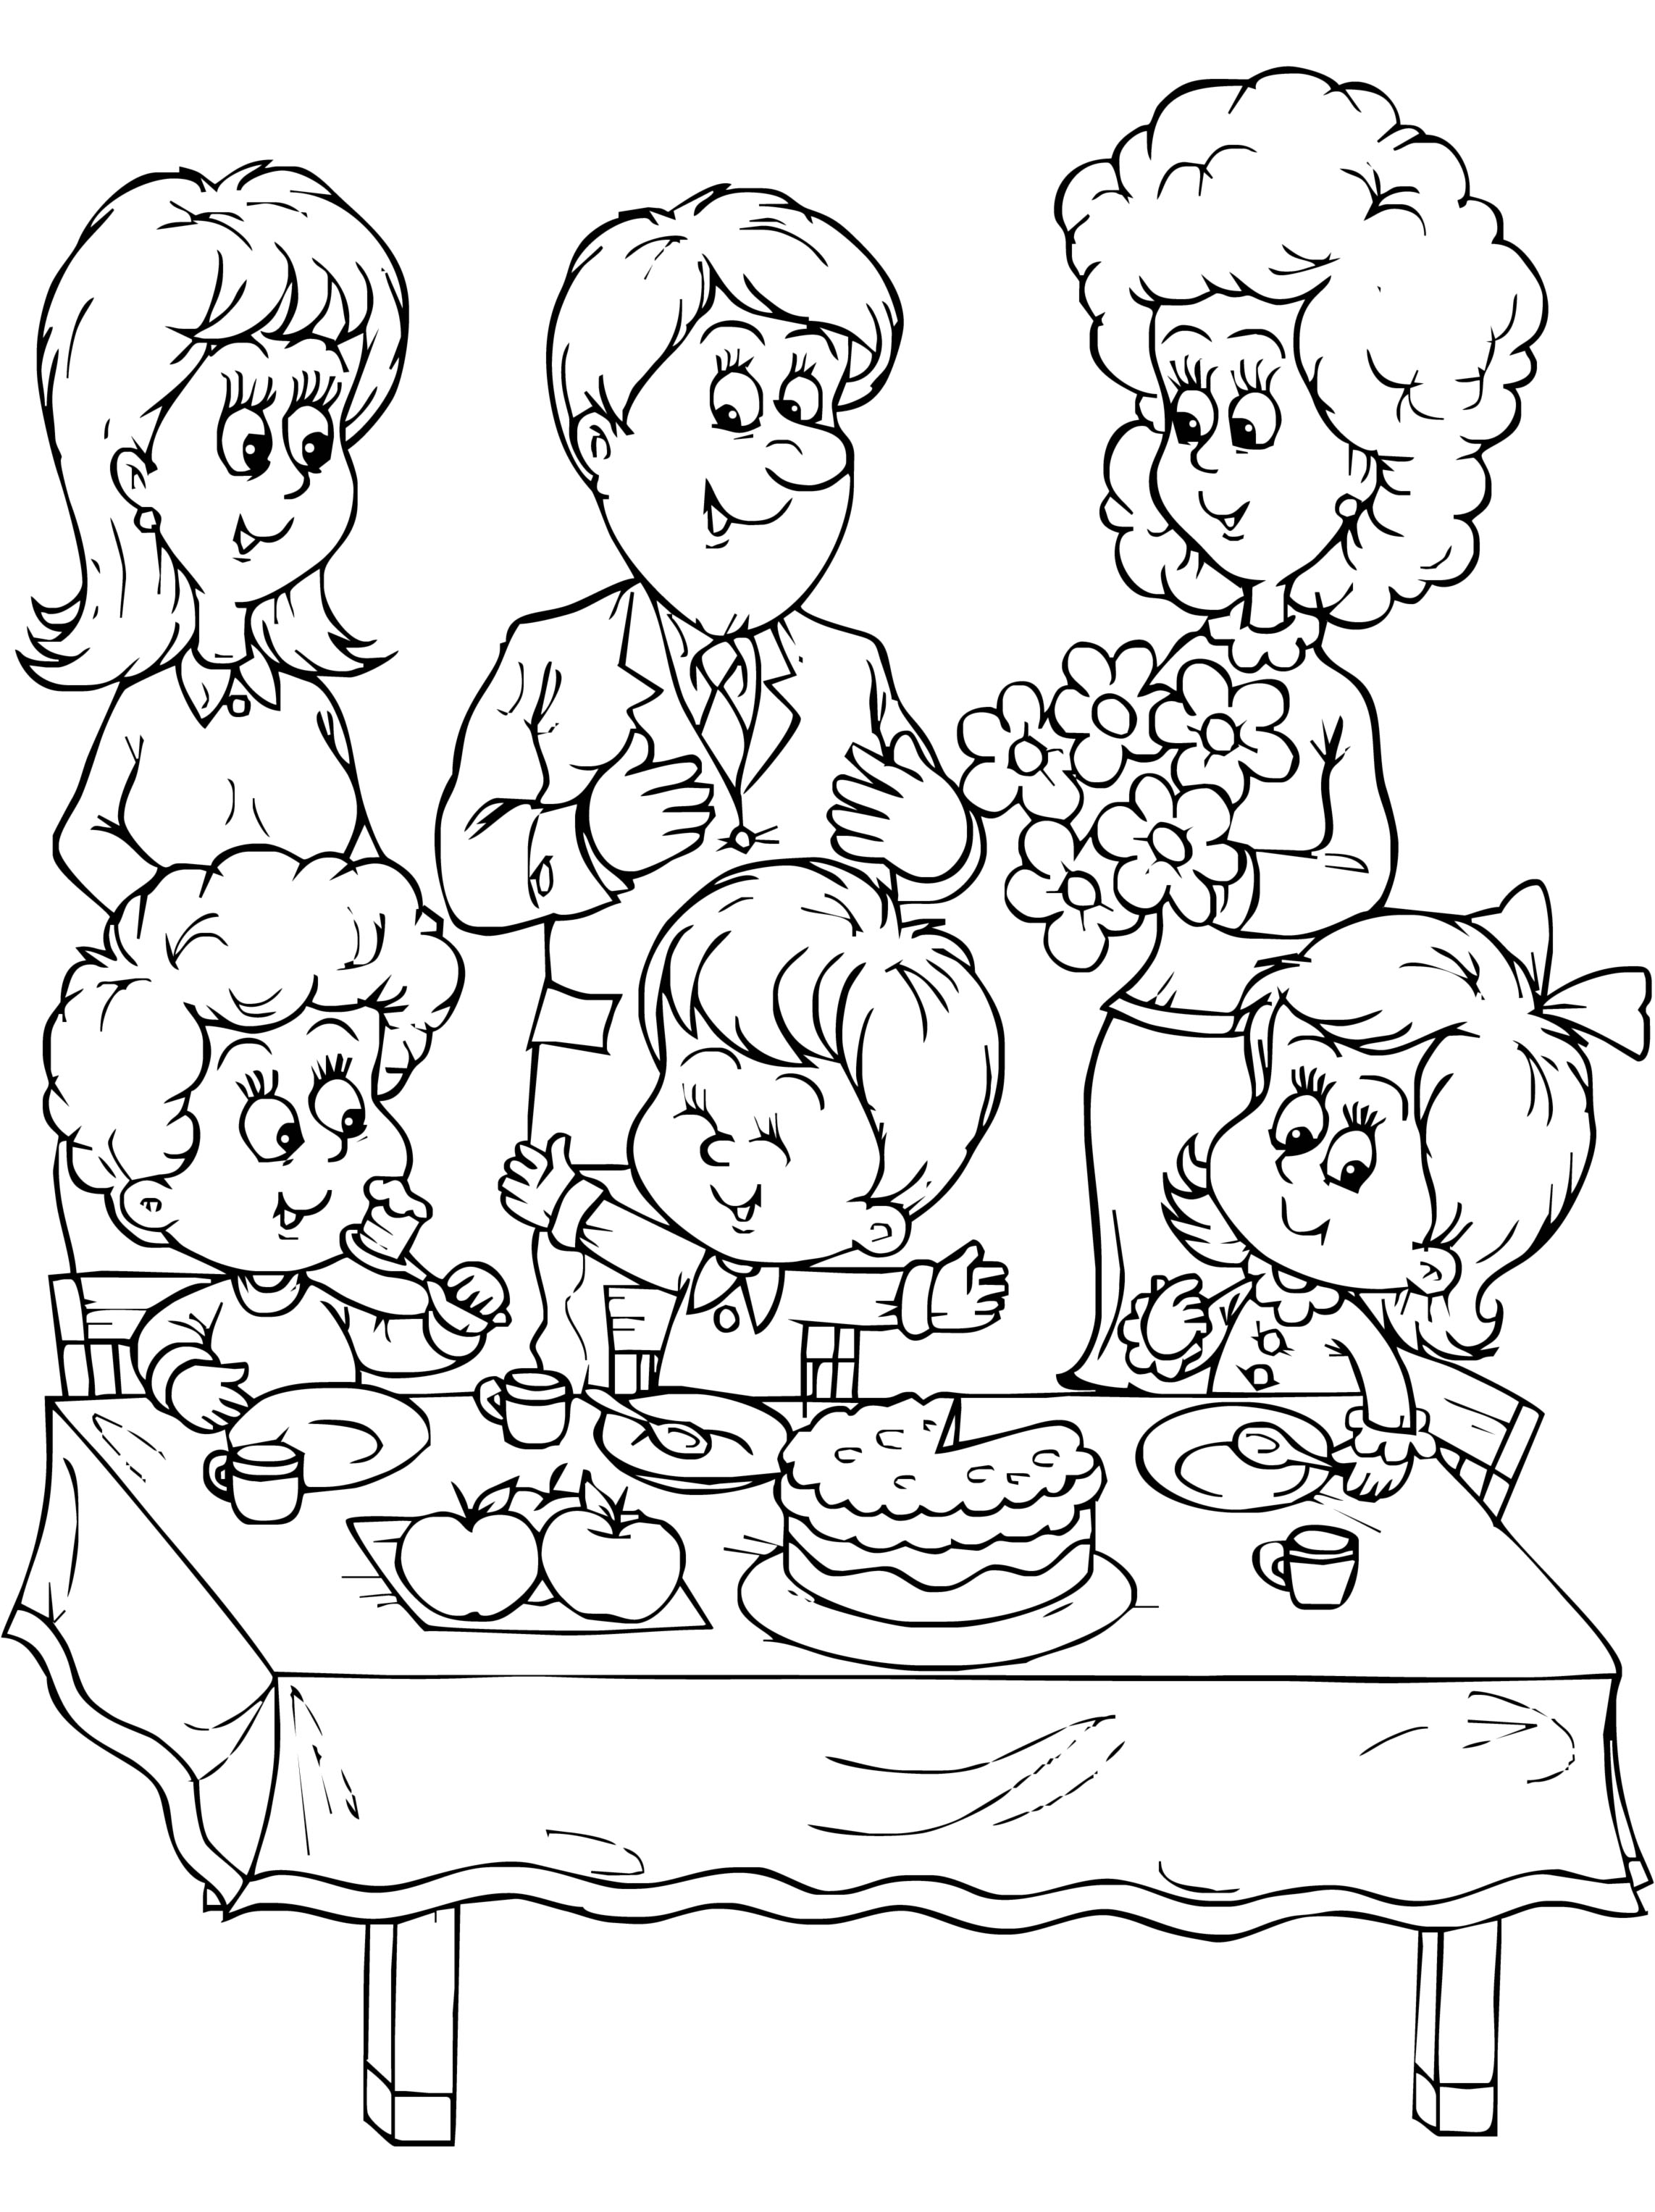 Large Family Dinner Coloring Page